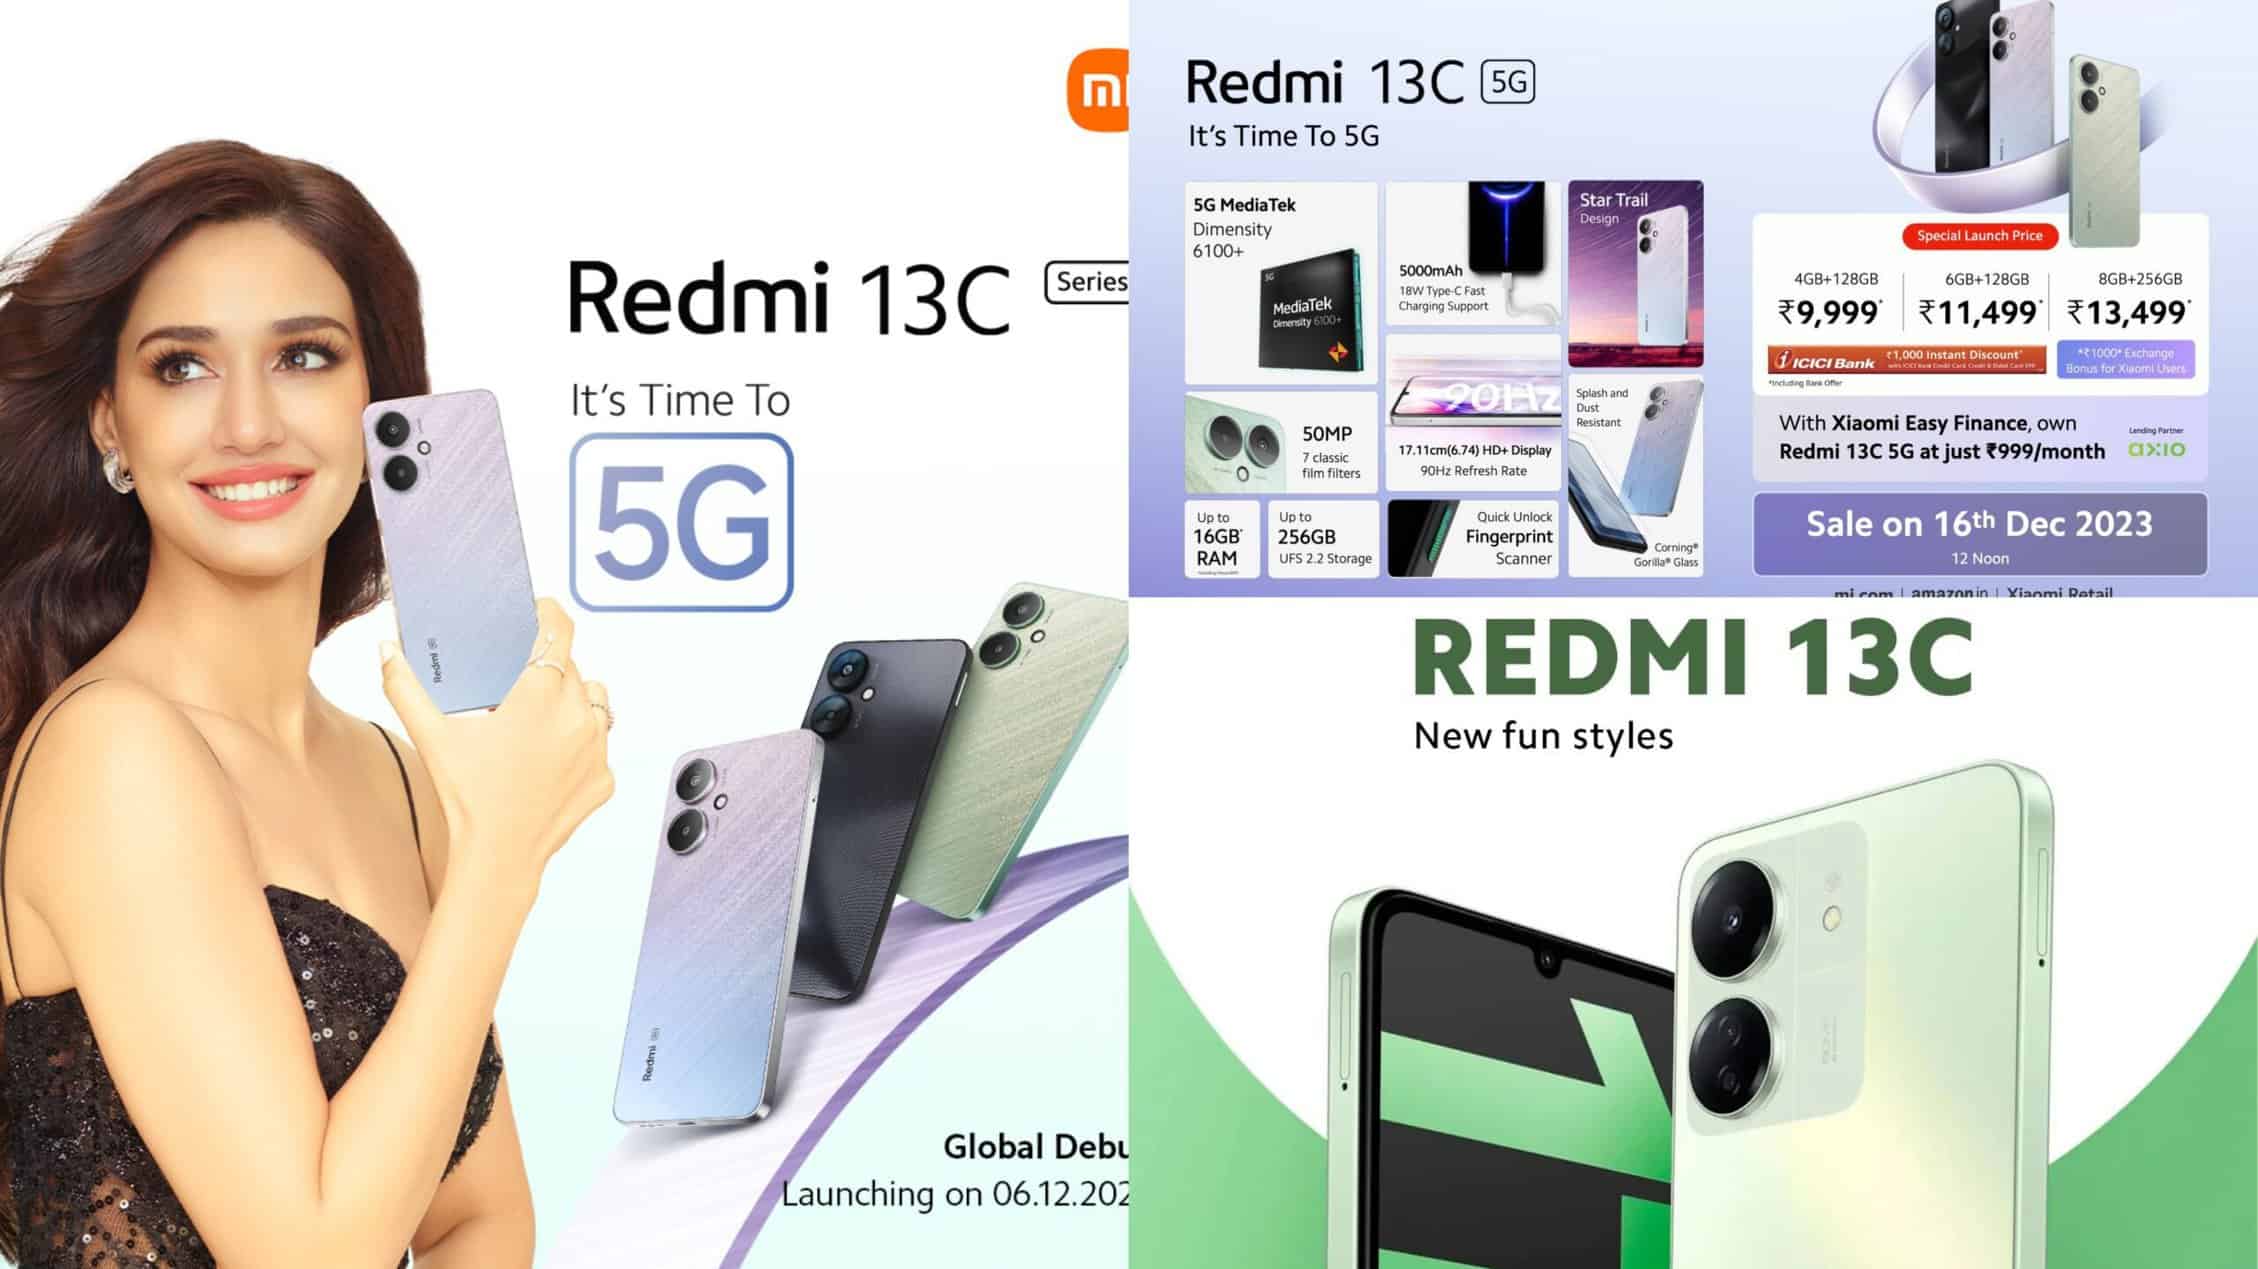 Redmi 13C and Redmi 13C 5G launched in India, Prices start at Rs 10999: check all the Details.